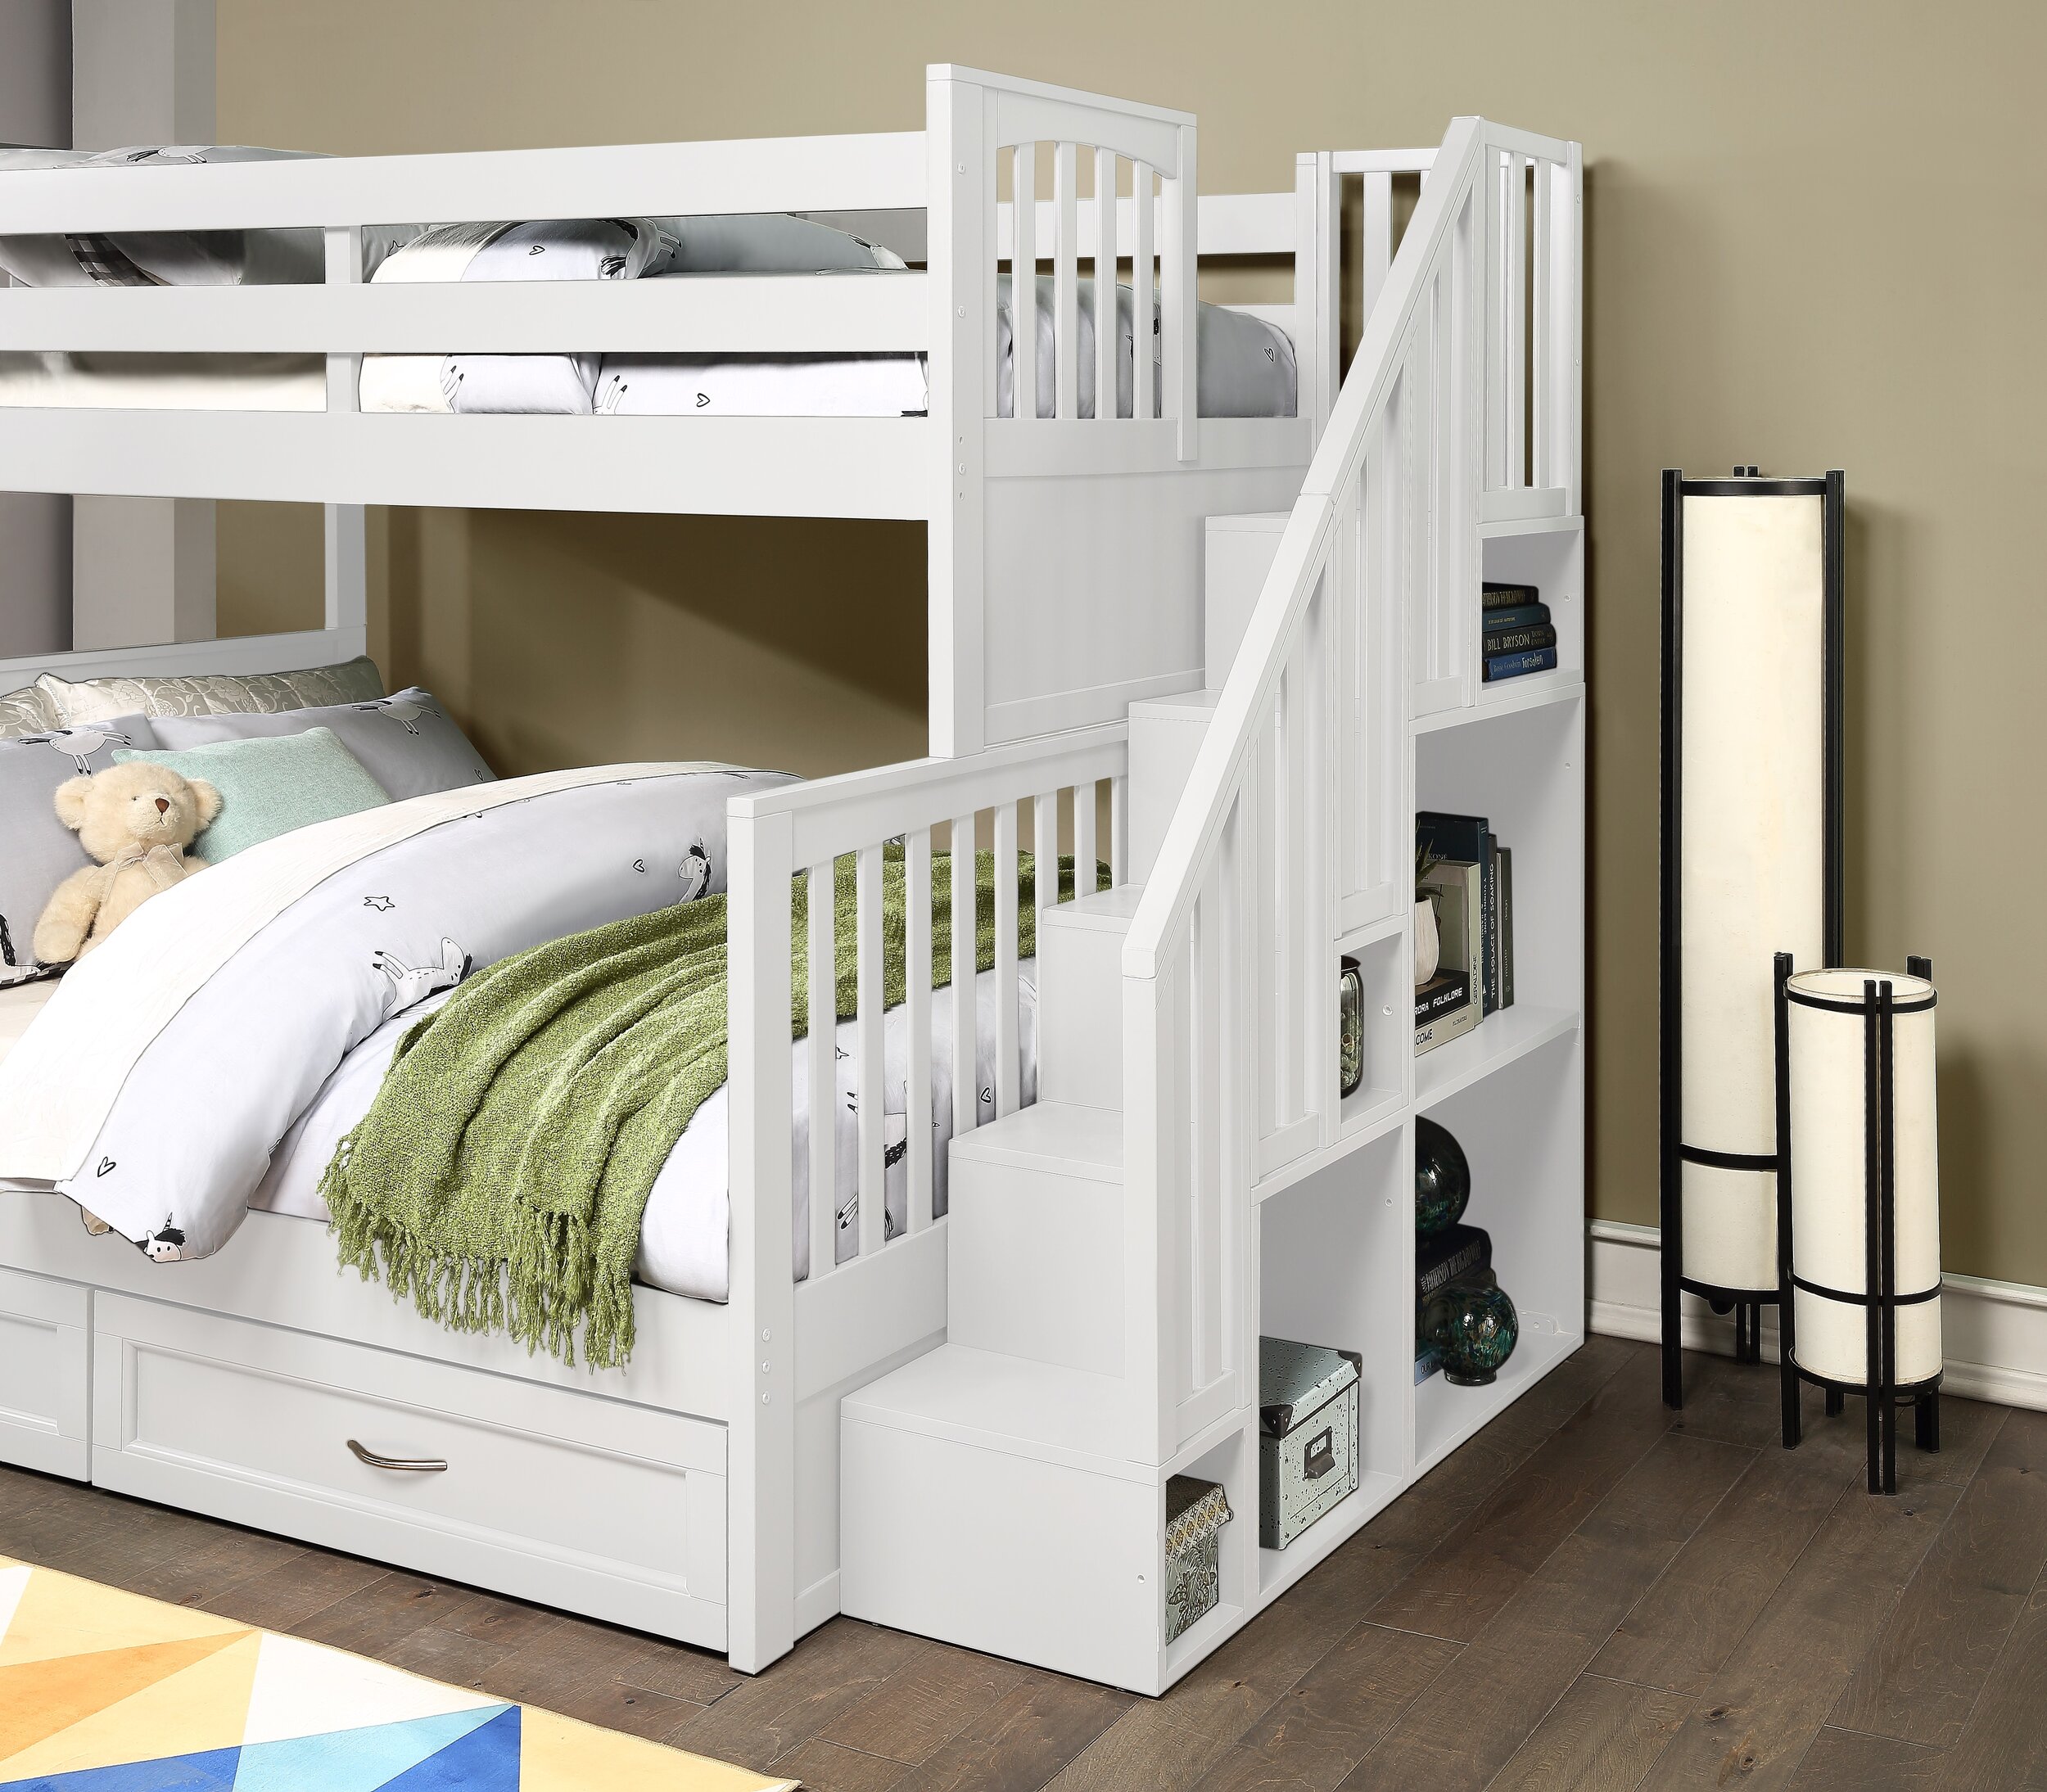 Caramia Furniture Bunk Beds, Ryan Twin Over Full Staircase Bunk Bed Instructions Pdf